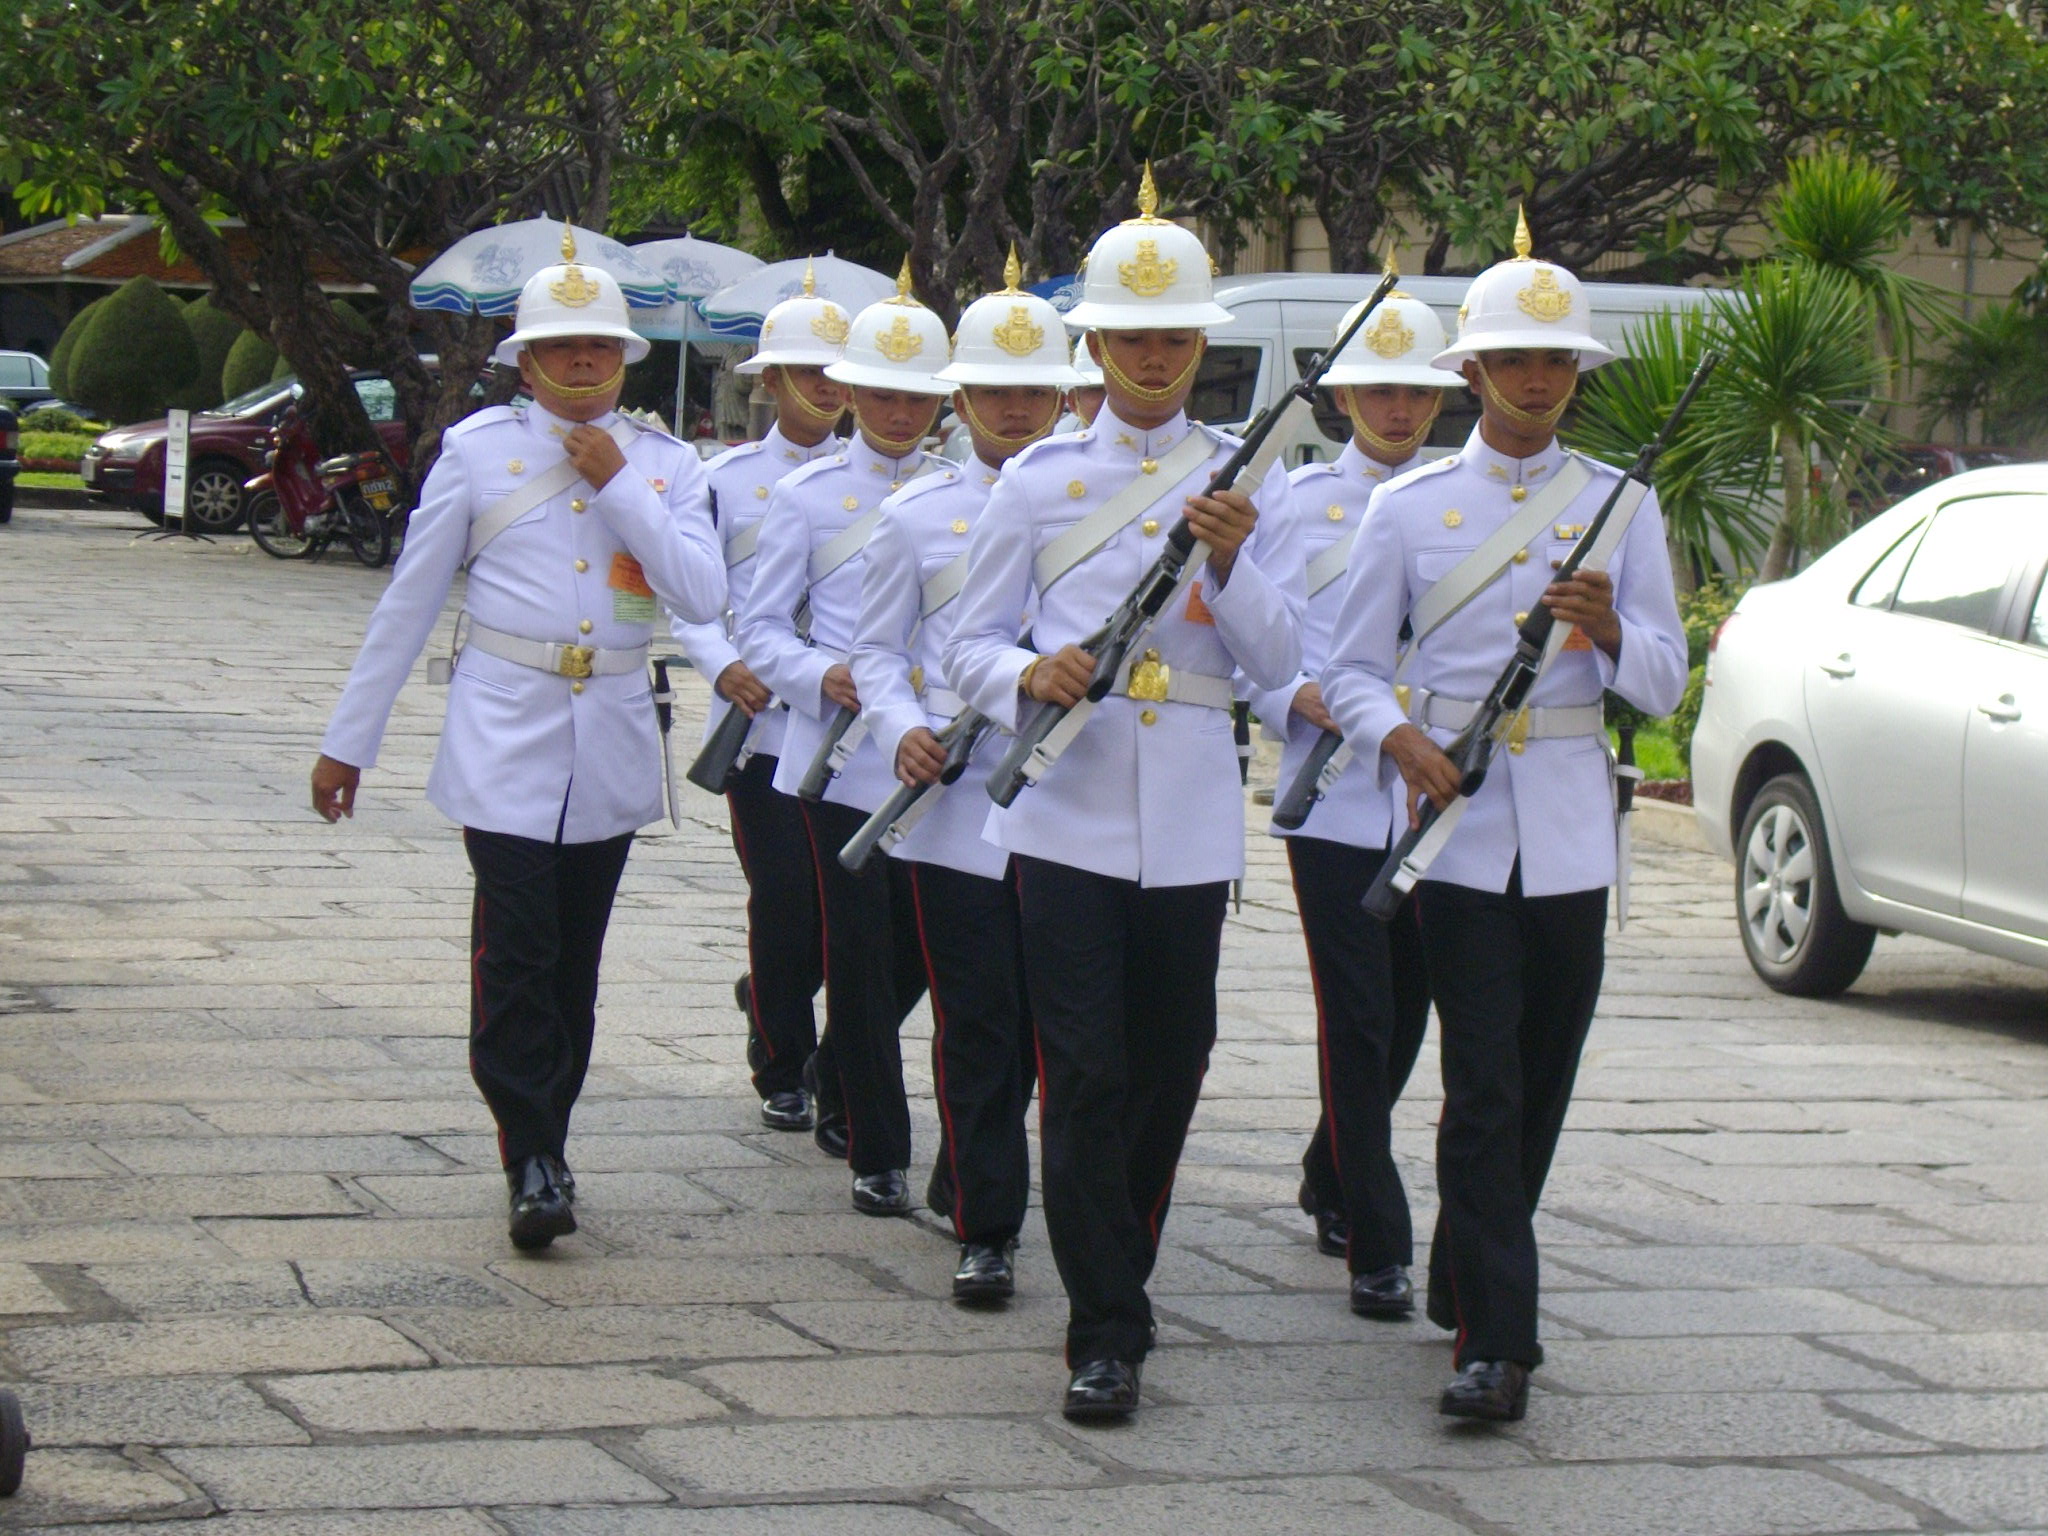 Thai Royal guard in the Grand Palace